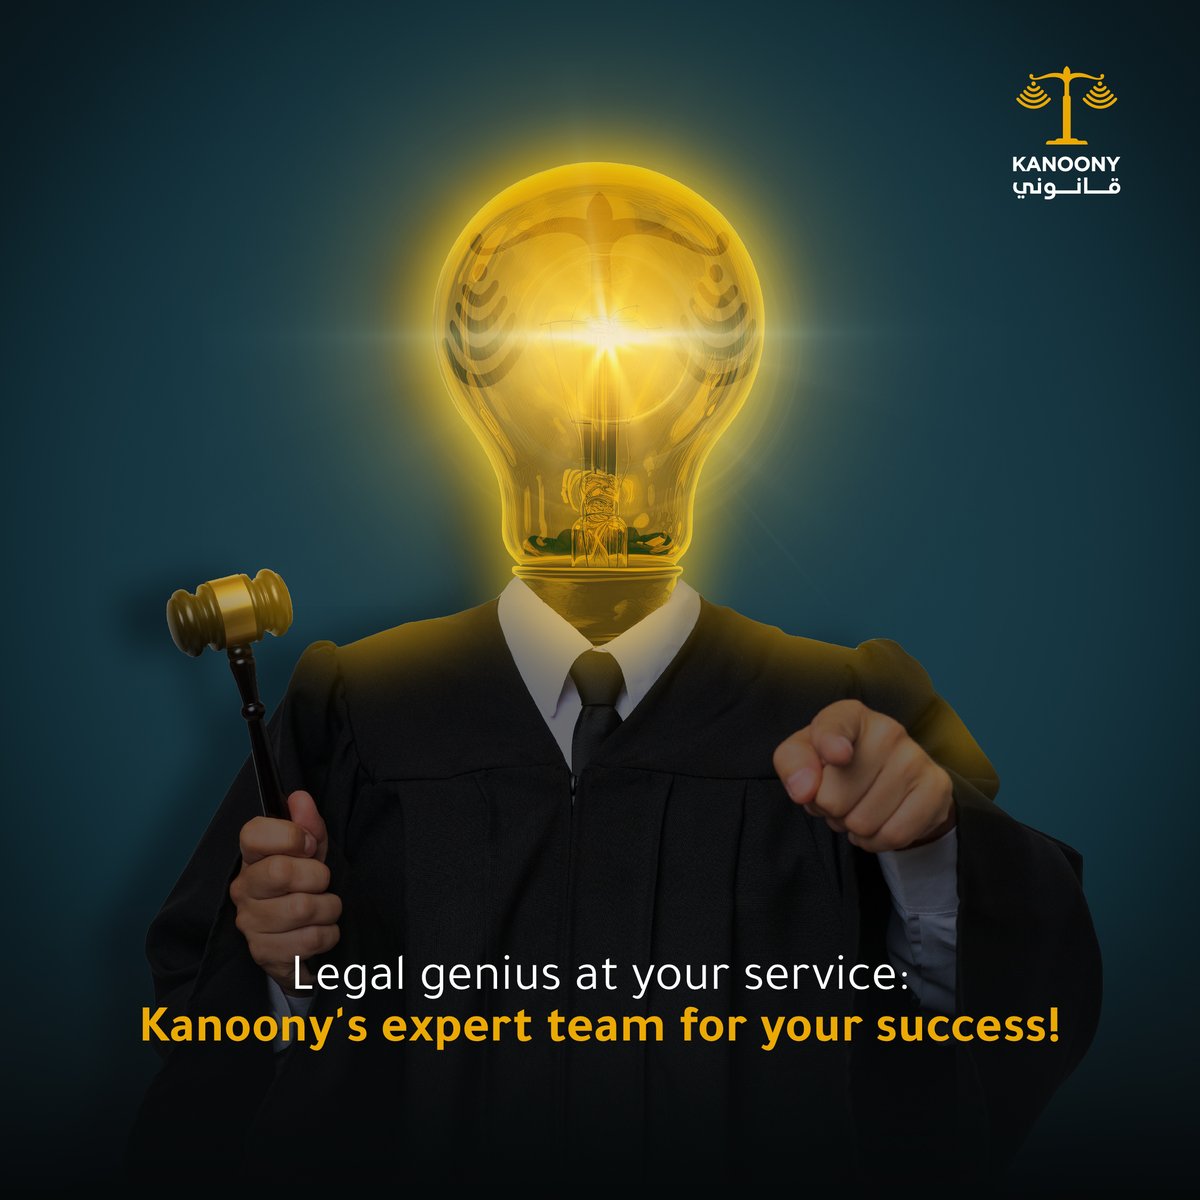 From formation to flourishing, trust Kanoony's expertise every step of the way. Get personalized support from seasoned legal professionals. Visit kanoony.com now!

#Kanoony #ContractTemplates #BusinessSetup #WillRegistration #GoldenVisa #UAE #Dubai